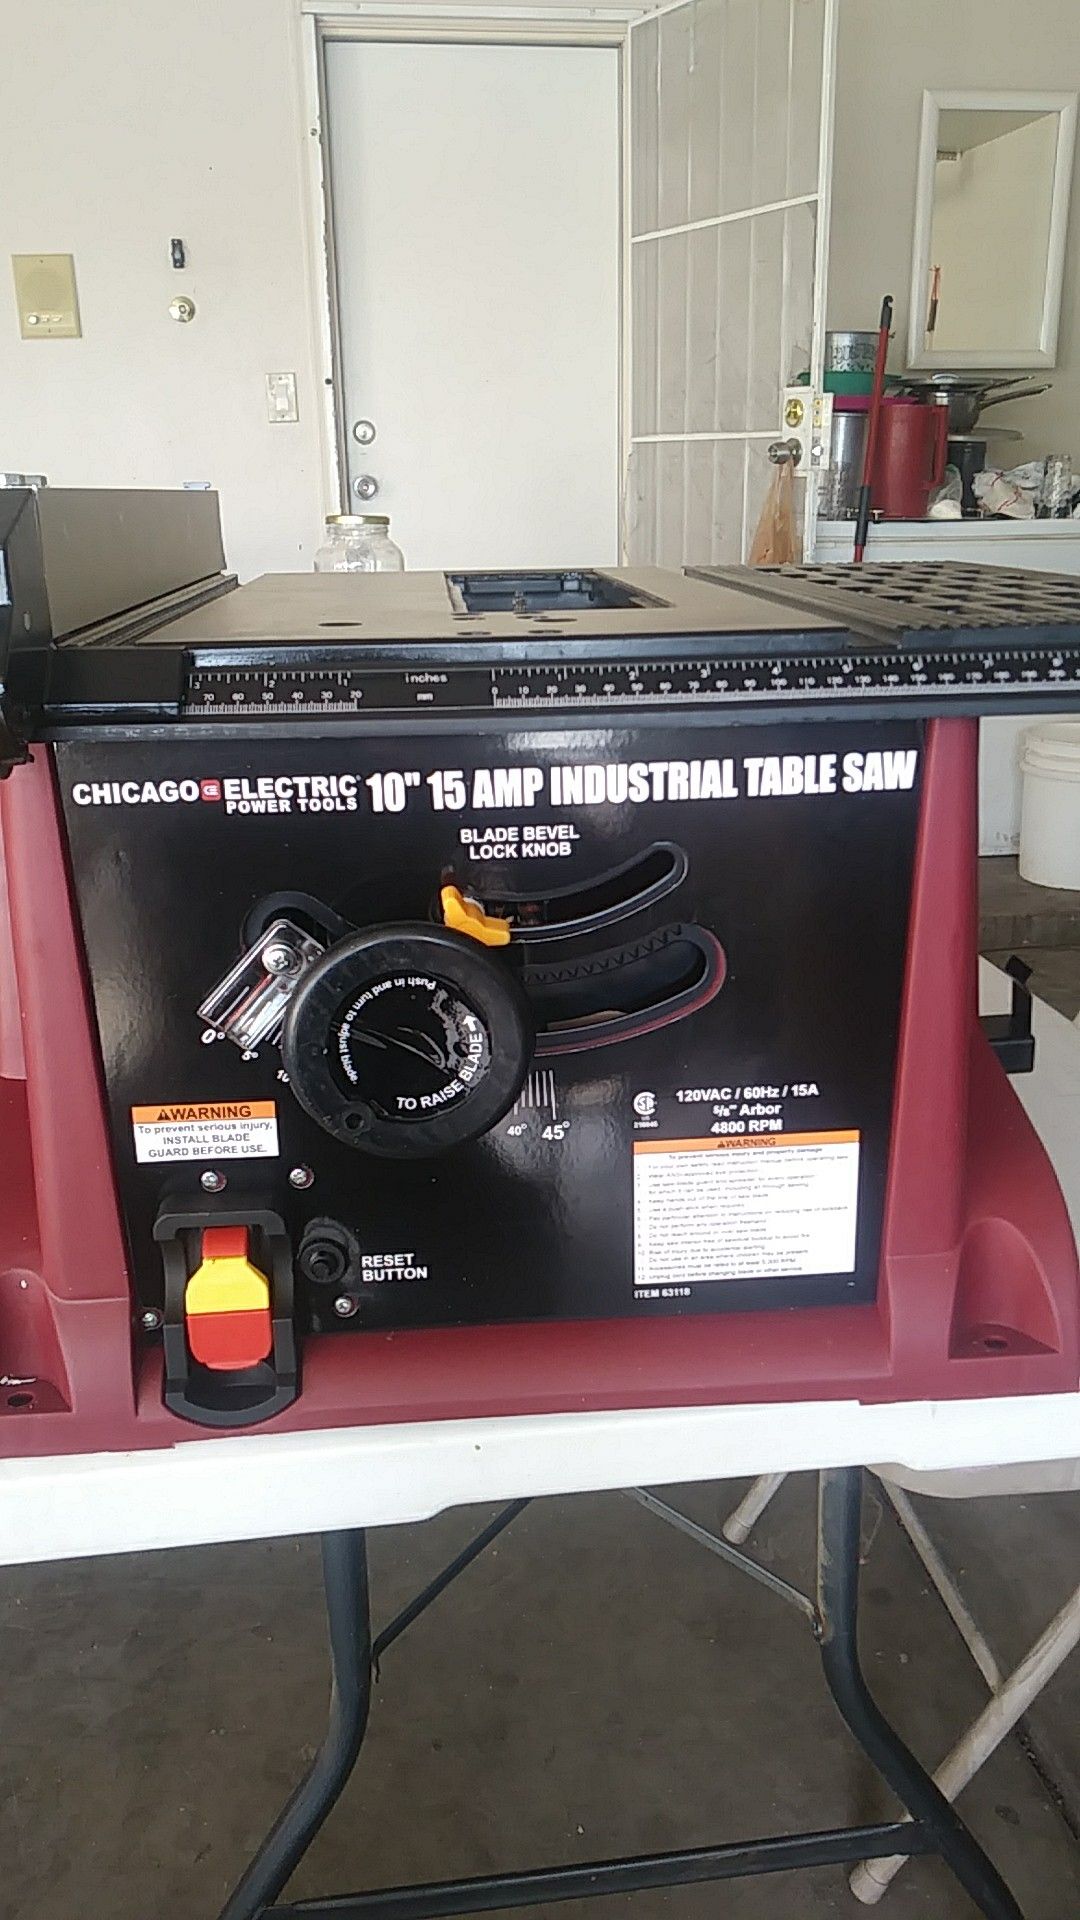 Chicago electric 10" 15 amp table saw